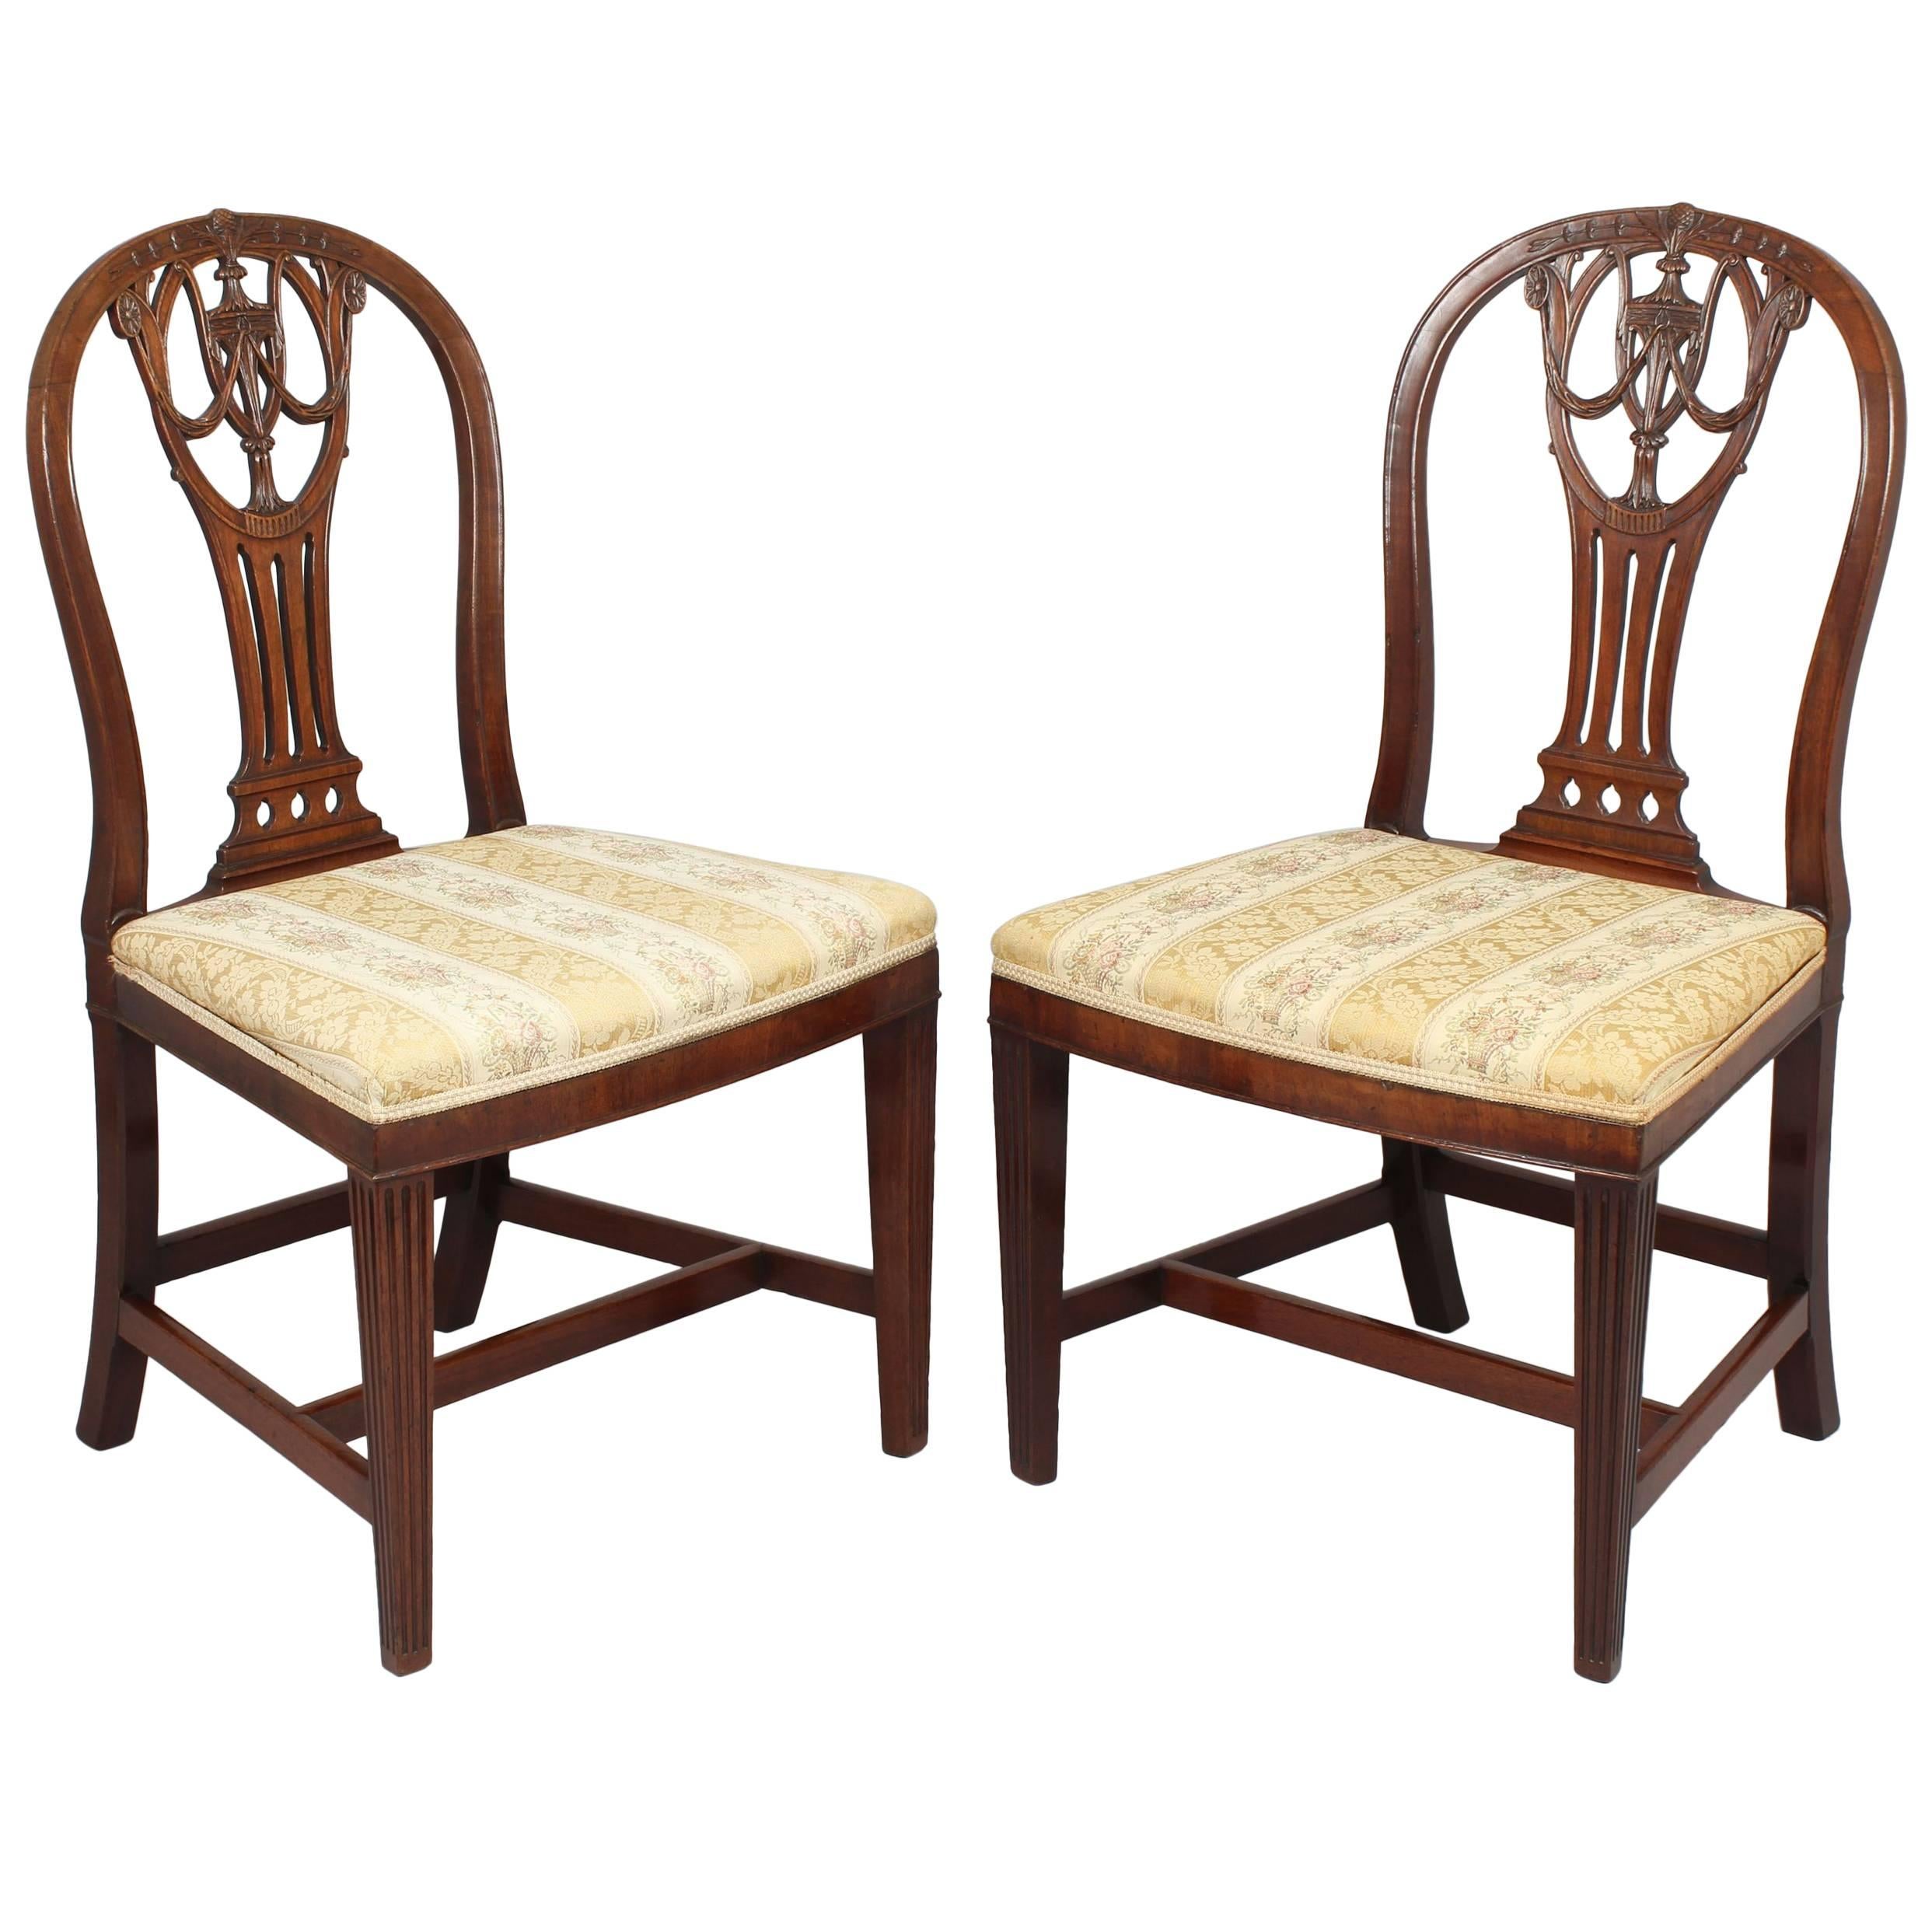 Pair of George III Period Mahogany Side-Chairs in the Hepplewhite Manner